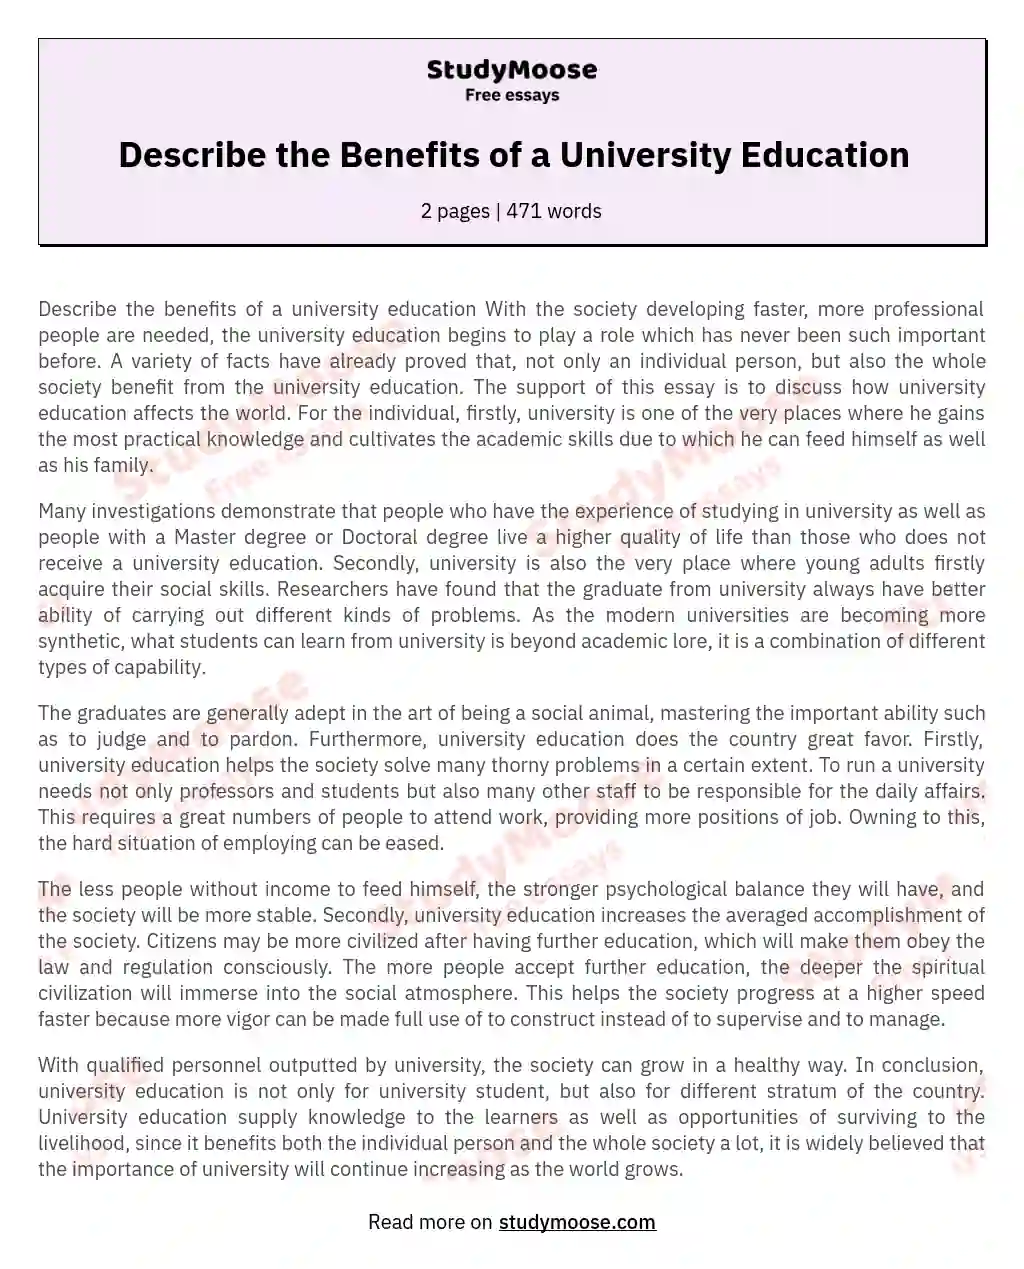 Describe the Benefits of a University Education essay